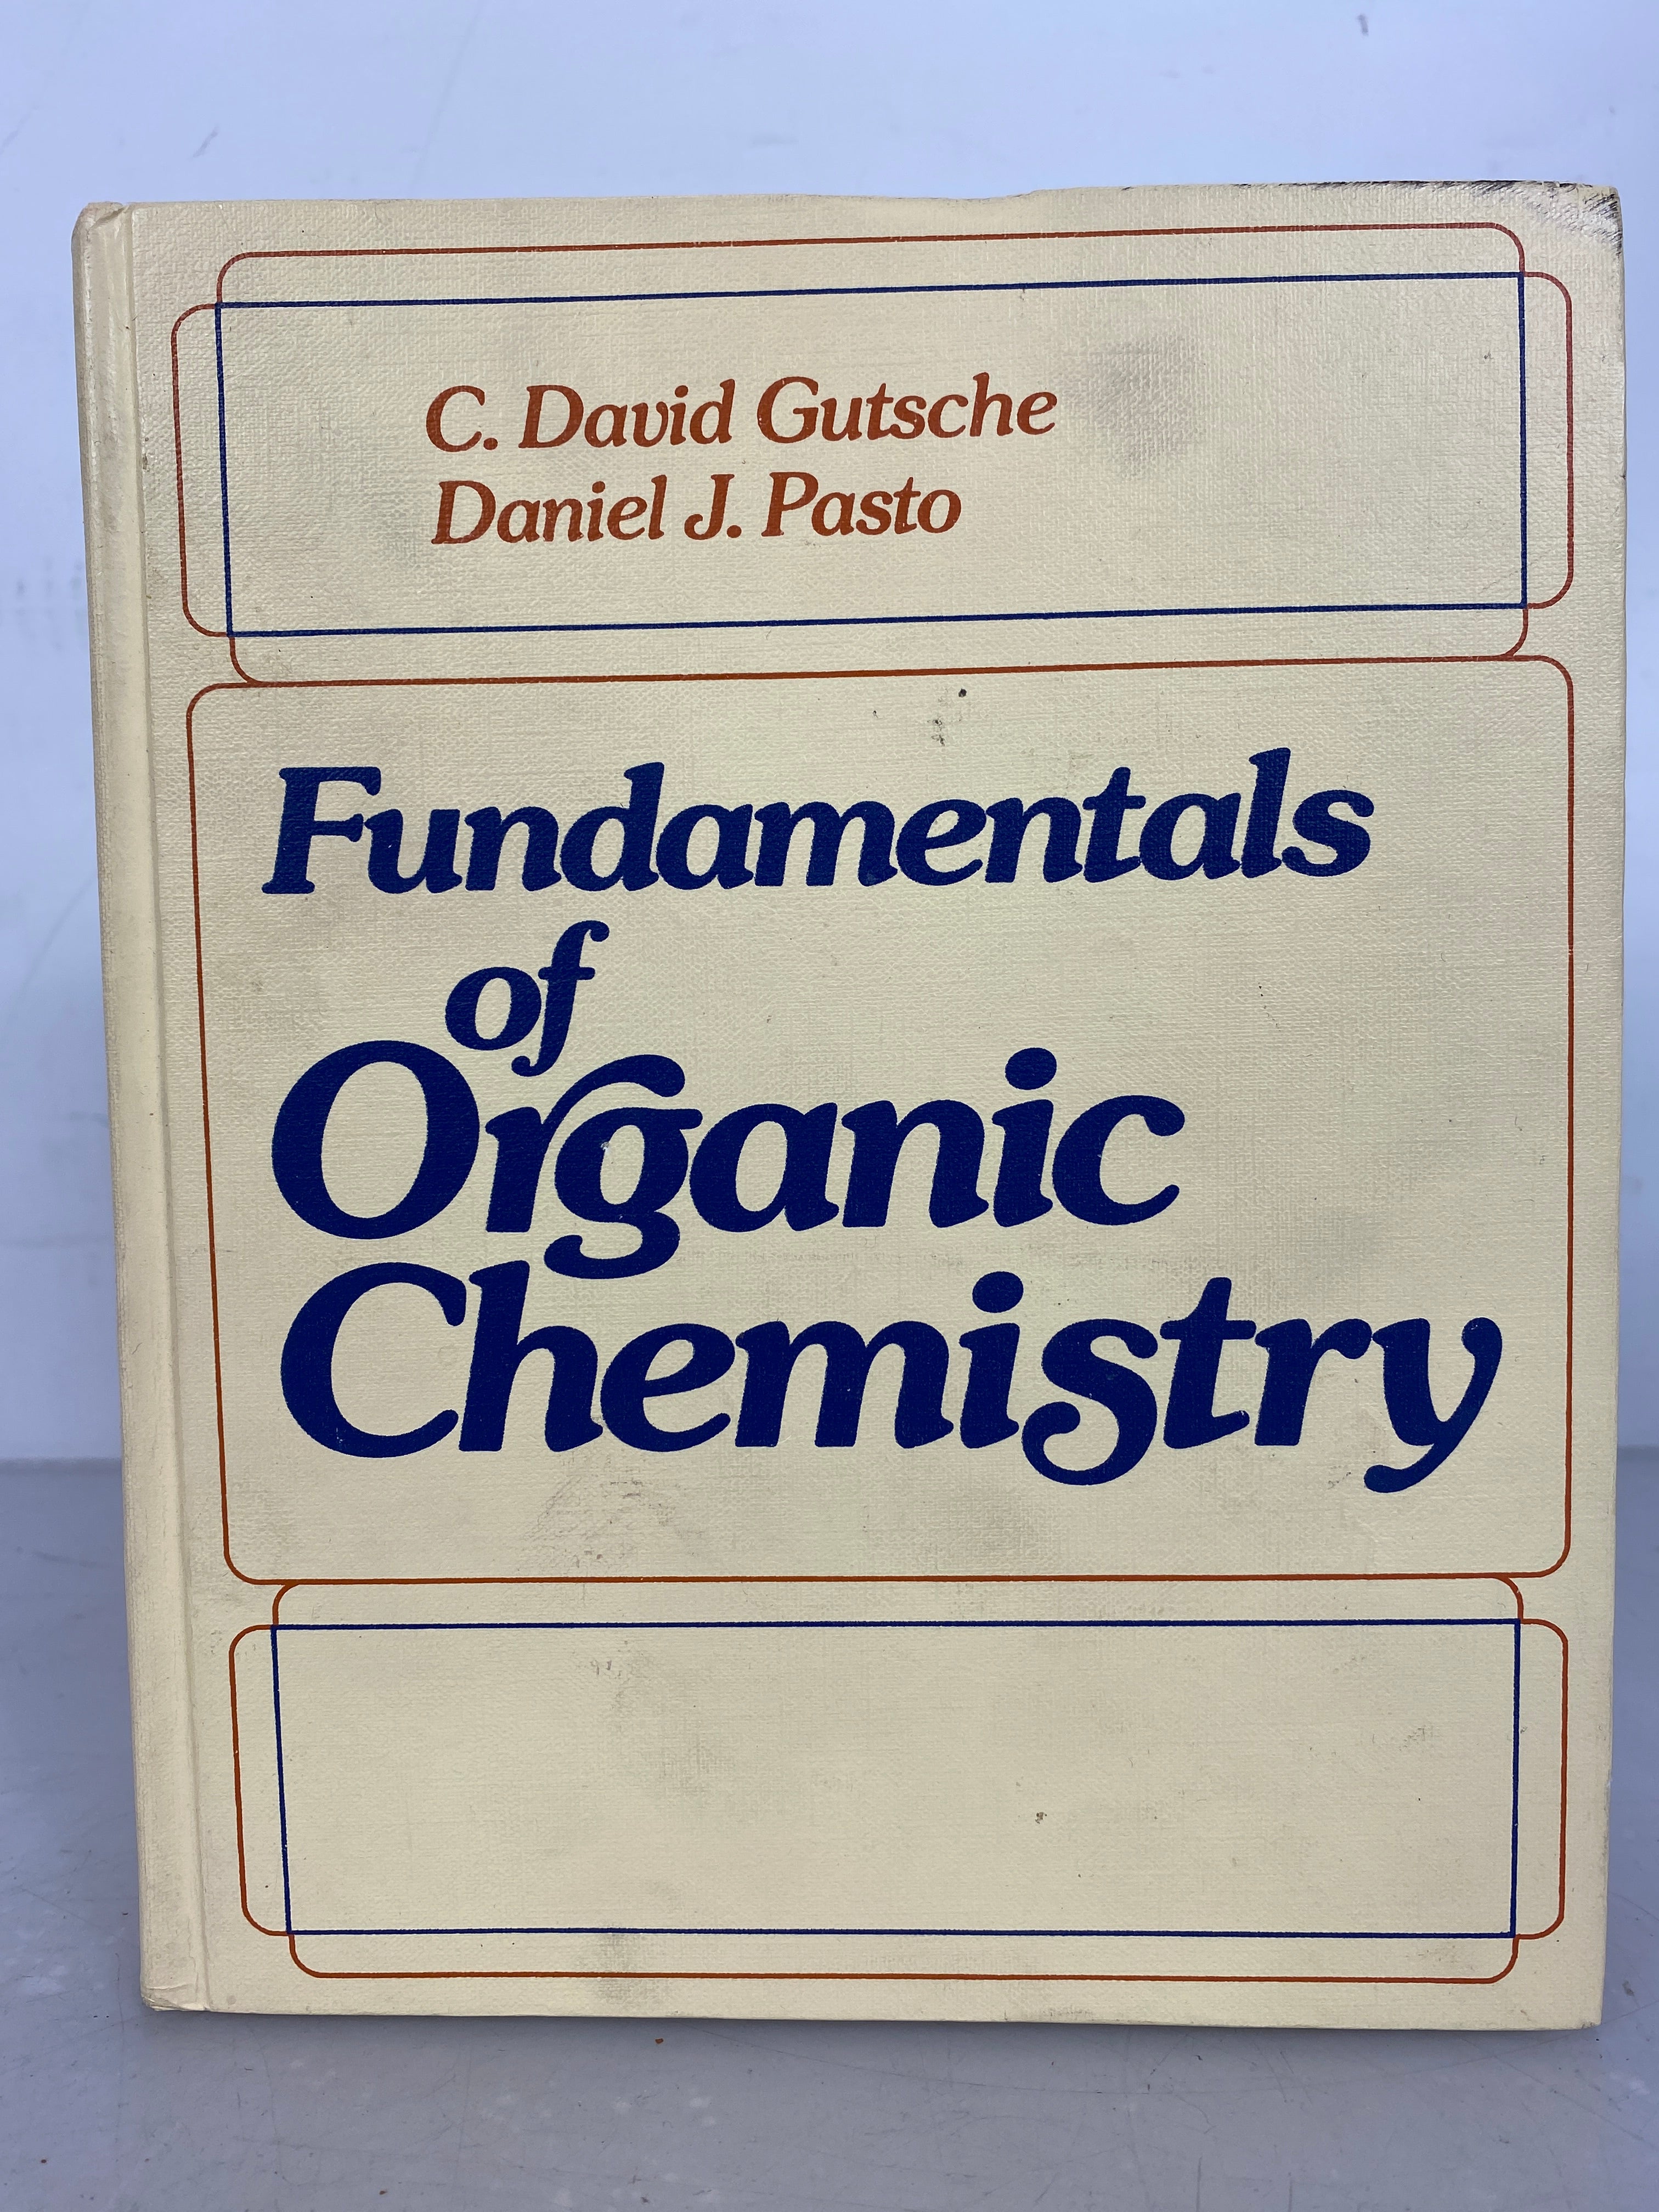 Chemistry Textbook: Fundamentals of Organic Chemistry by Gutsche and Pasto 1975 HC Vintage